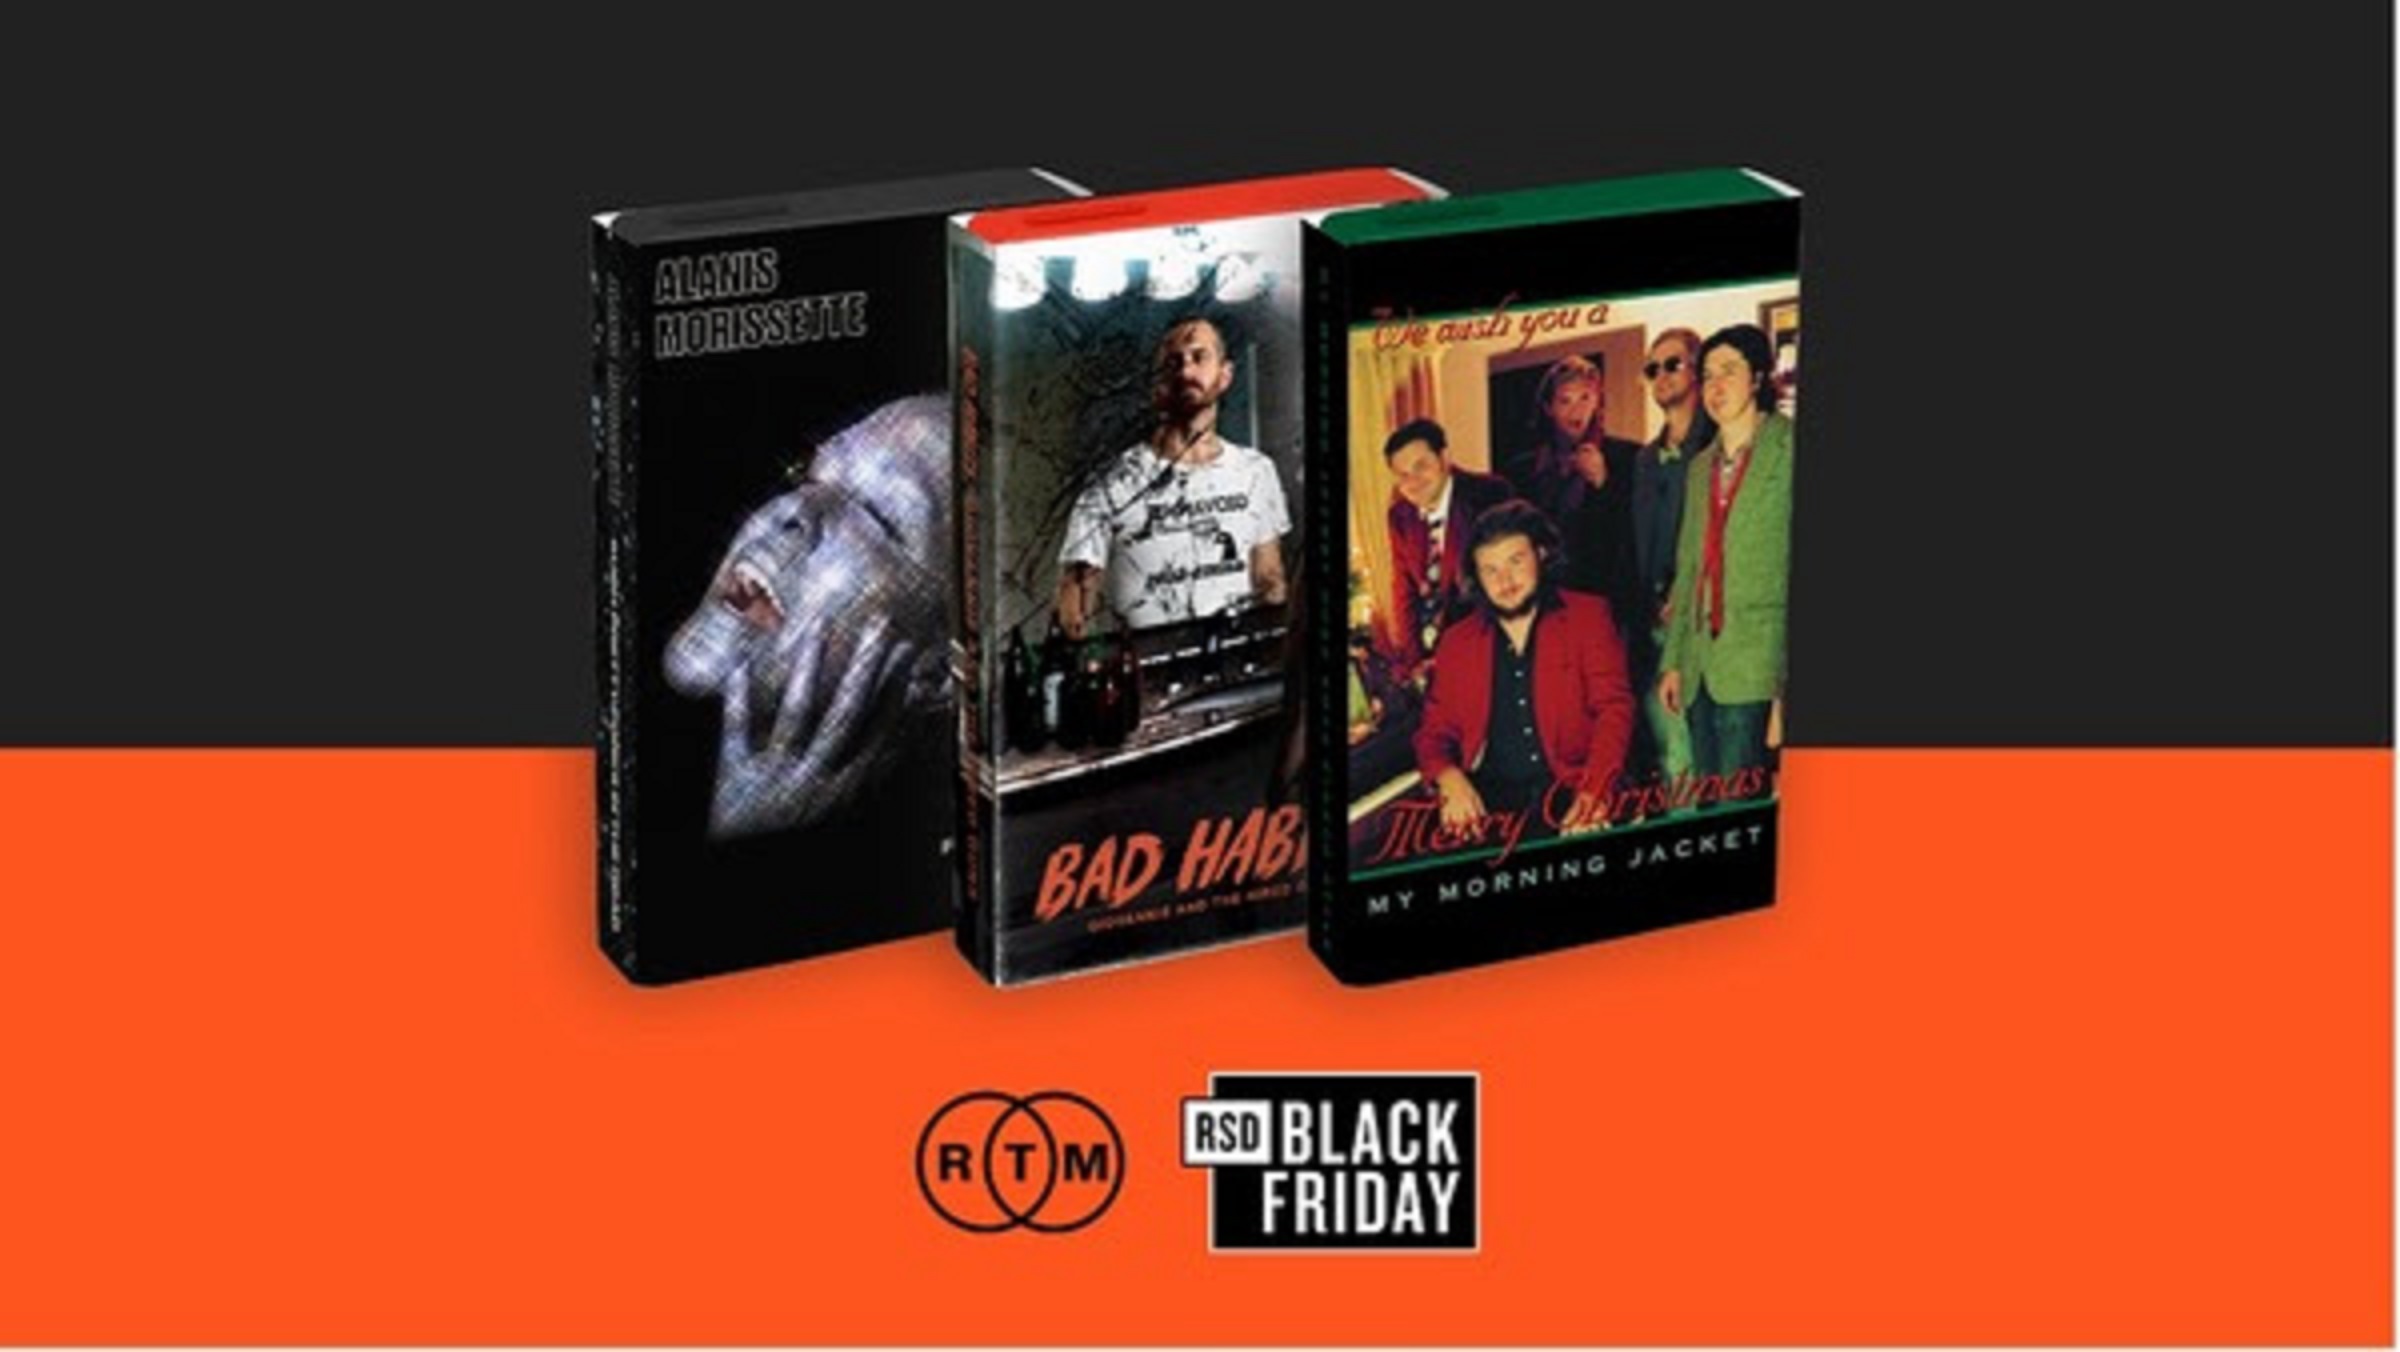 This Friday: My Morning Jacket, Alanis Morissette & Giovannie and the Hired Guns albums available on cassette for the first time ever for RSD Black Friday